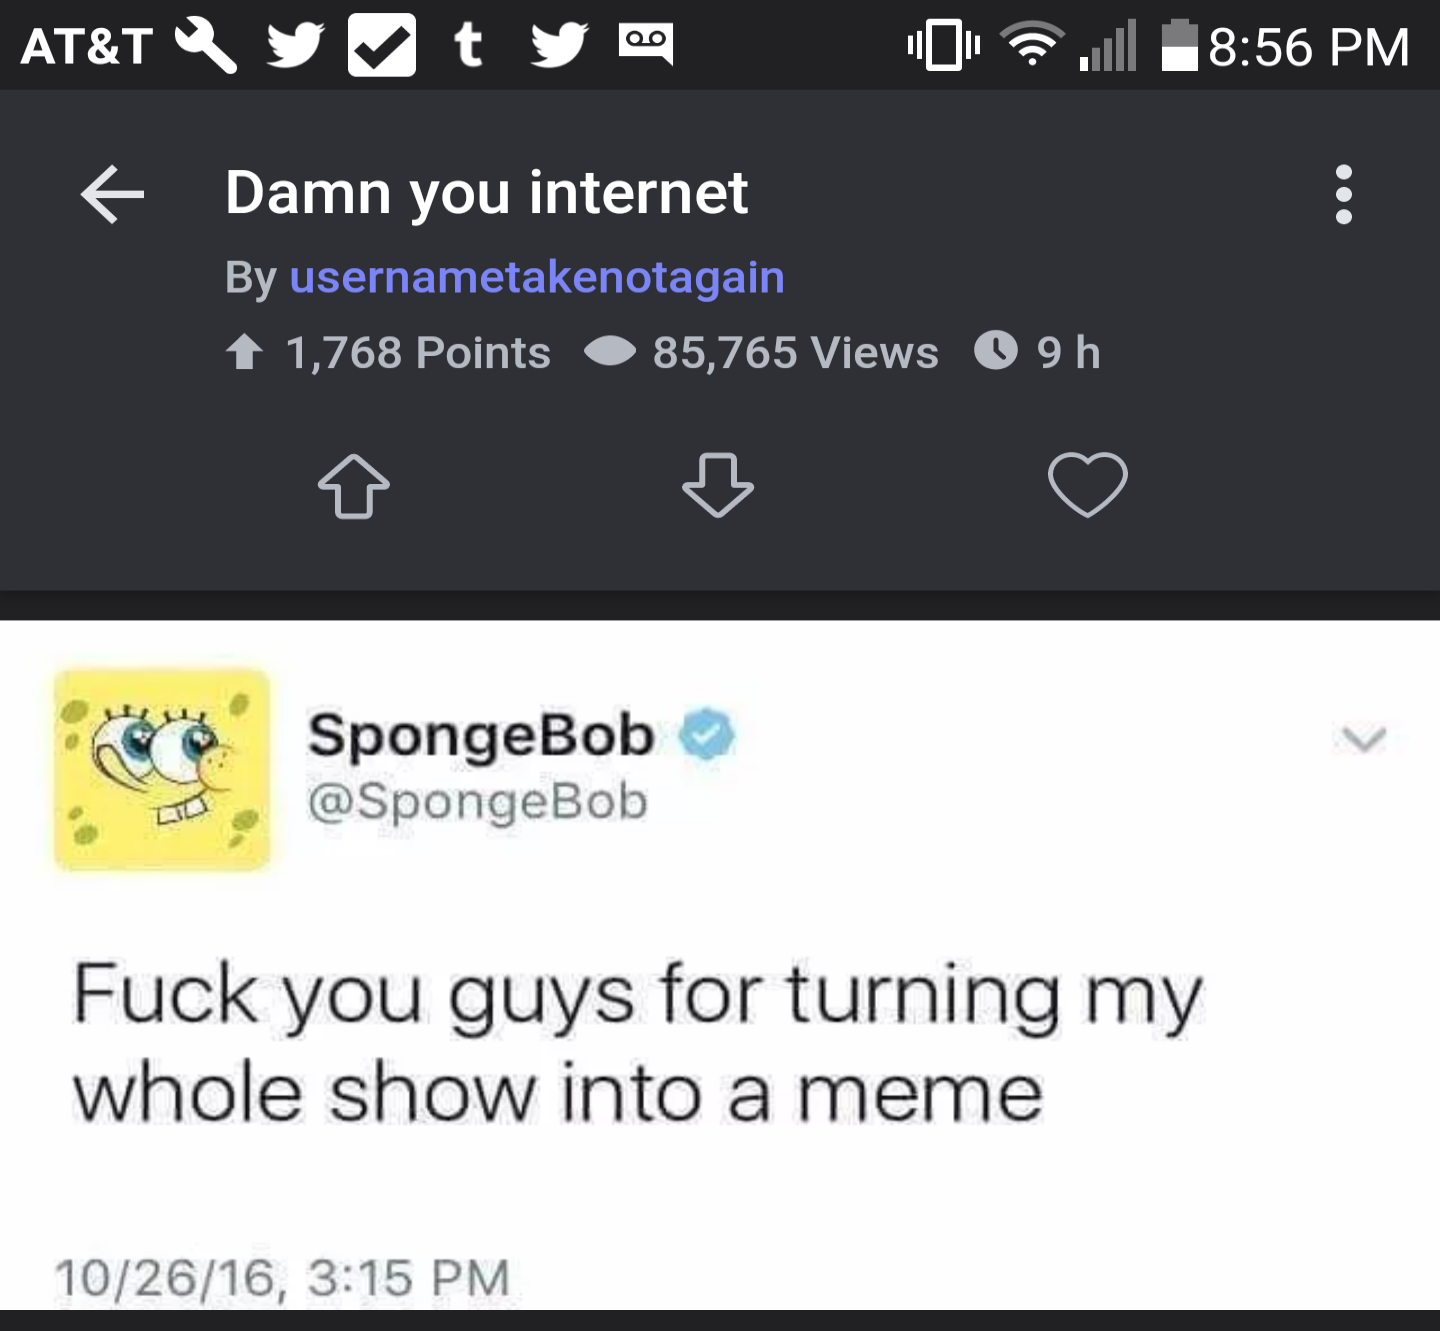 advantages of internet - At&T Yt y ou Damn you internet By usernametakenotagain 1 1,768 Points 85,765 Views 09h Spon SpongeBob Fuck you guys for turning my whole show into a meme 102616,